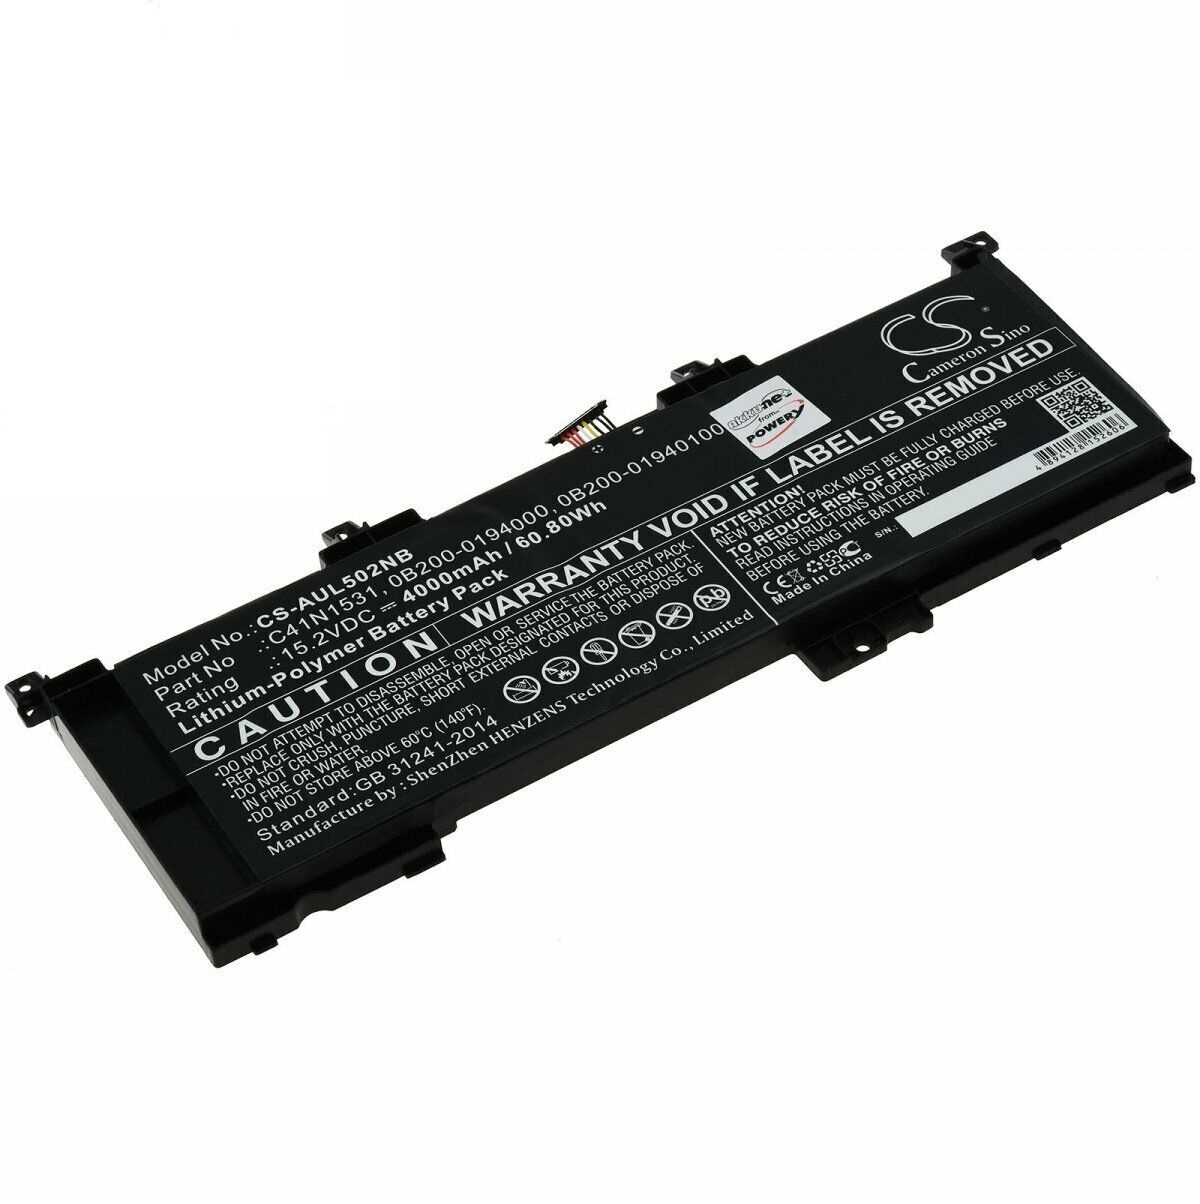 Batterie pour C41N1531 0B200-01940100 Asus GL502VS-1A GL502VS-1E GL502VT-1B GL502VY GL502VY-1A (compatible)